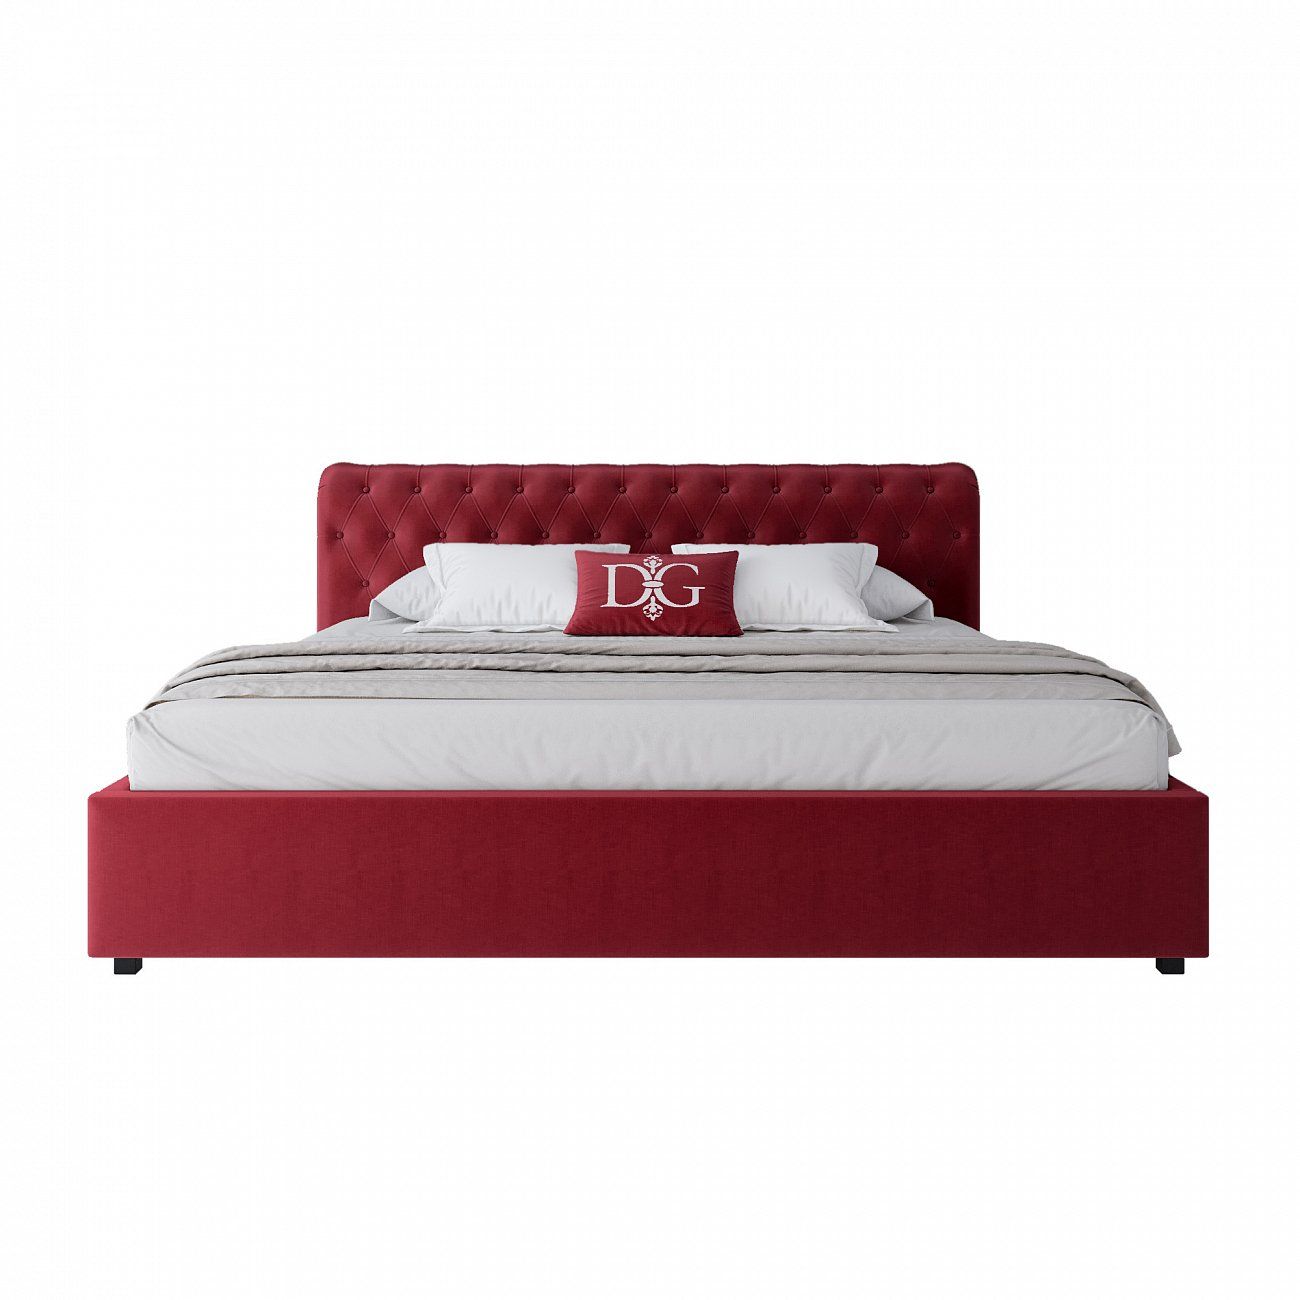 Euro bed with upholstered headboard 200x200 cm red Sweet Dreams